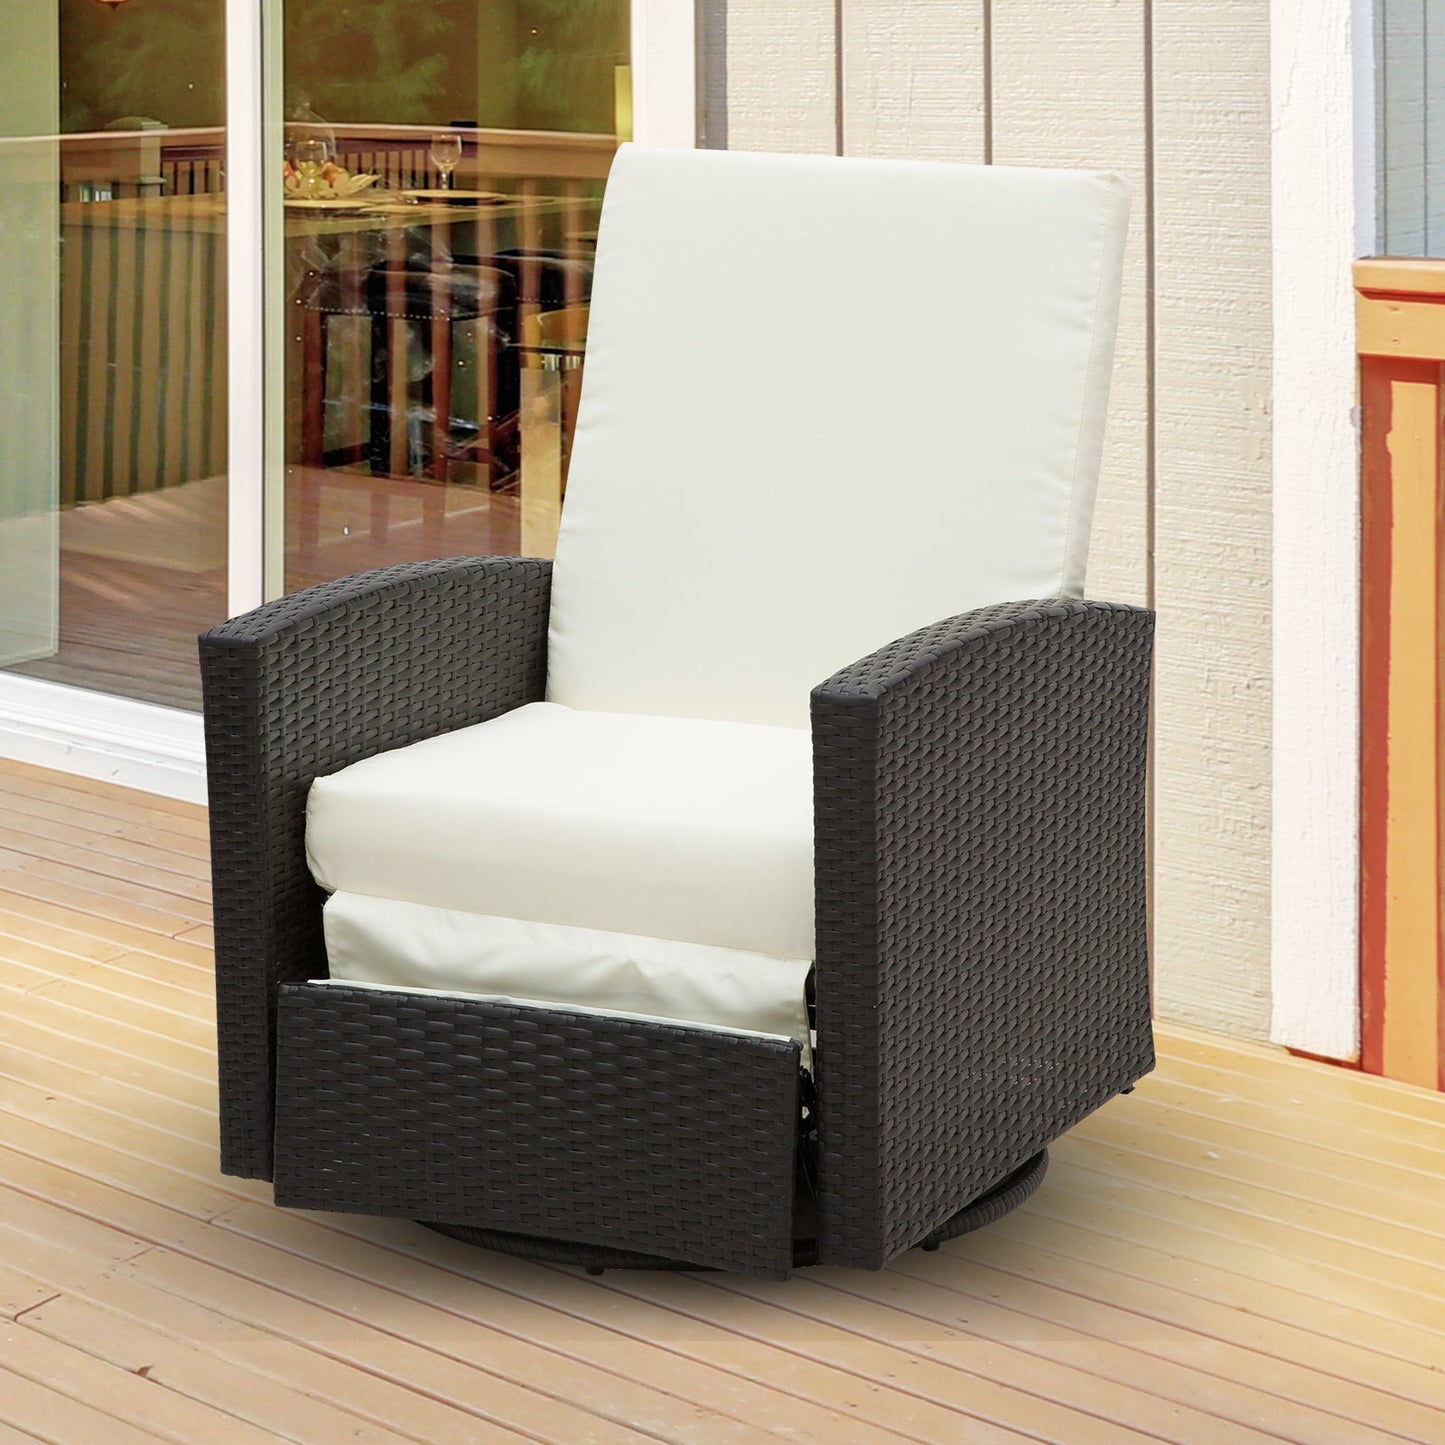 Outdoor and Garden-Patio Wicker Recliner Chair with Footrest, Outdoor PE Rattan 360° Swivel Chair with Soft Cushion, Lounge Chair for Patio, Garden, White - Outdoor Style Company